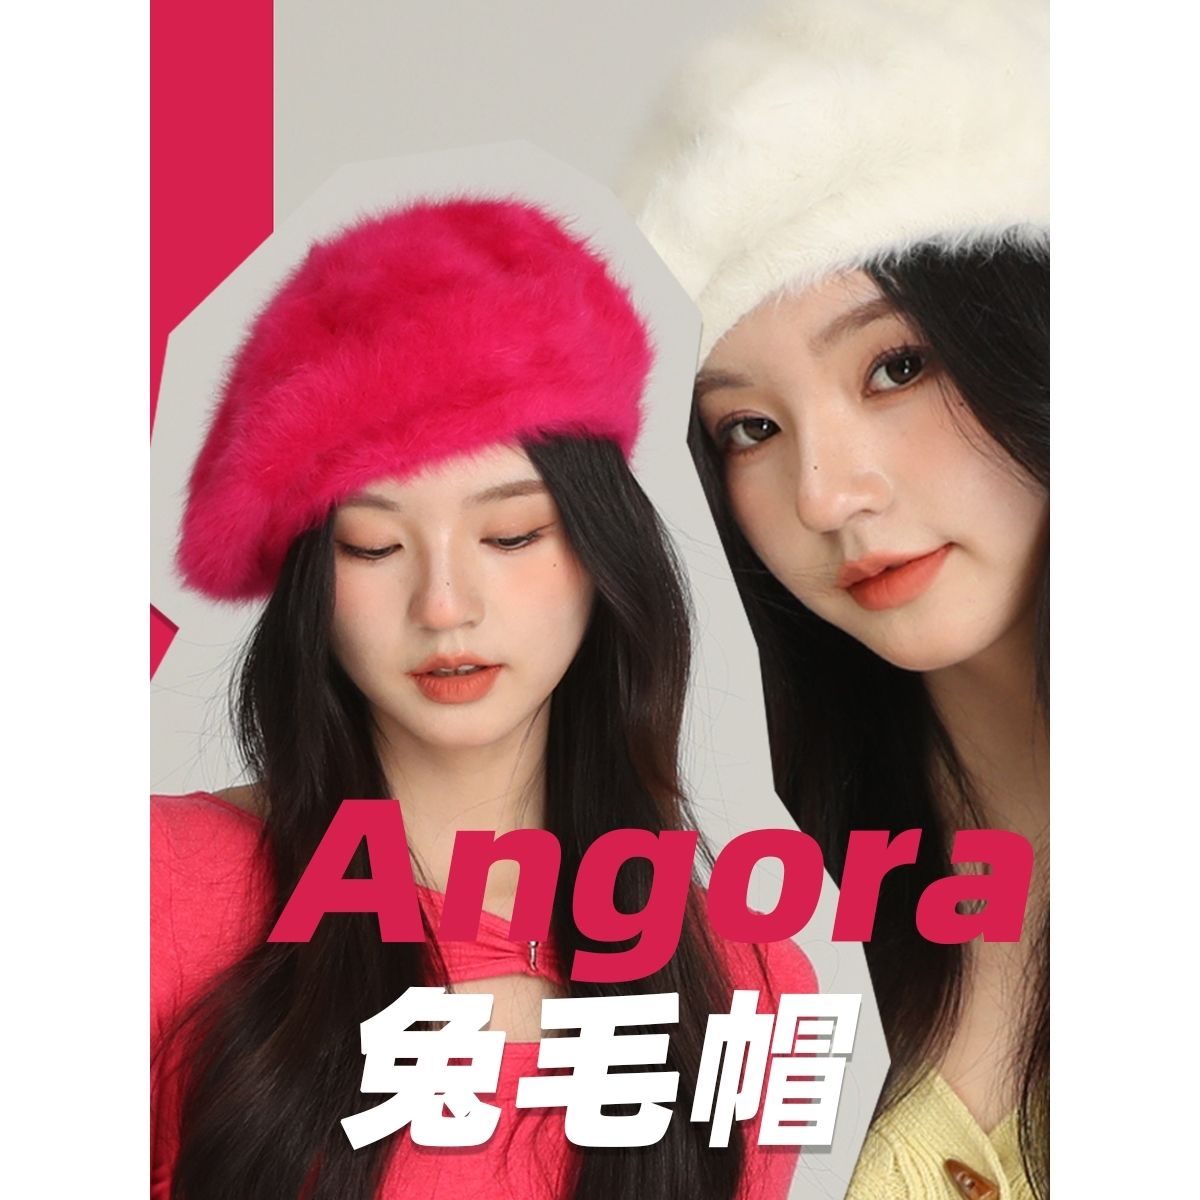 Rose red beret big head circumference white rabbit fur beret women 2022 explosion style autumn and winter plush hat furry